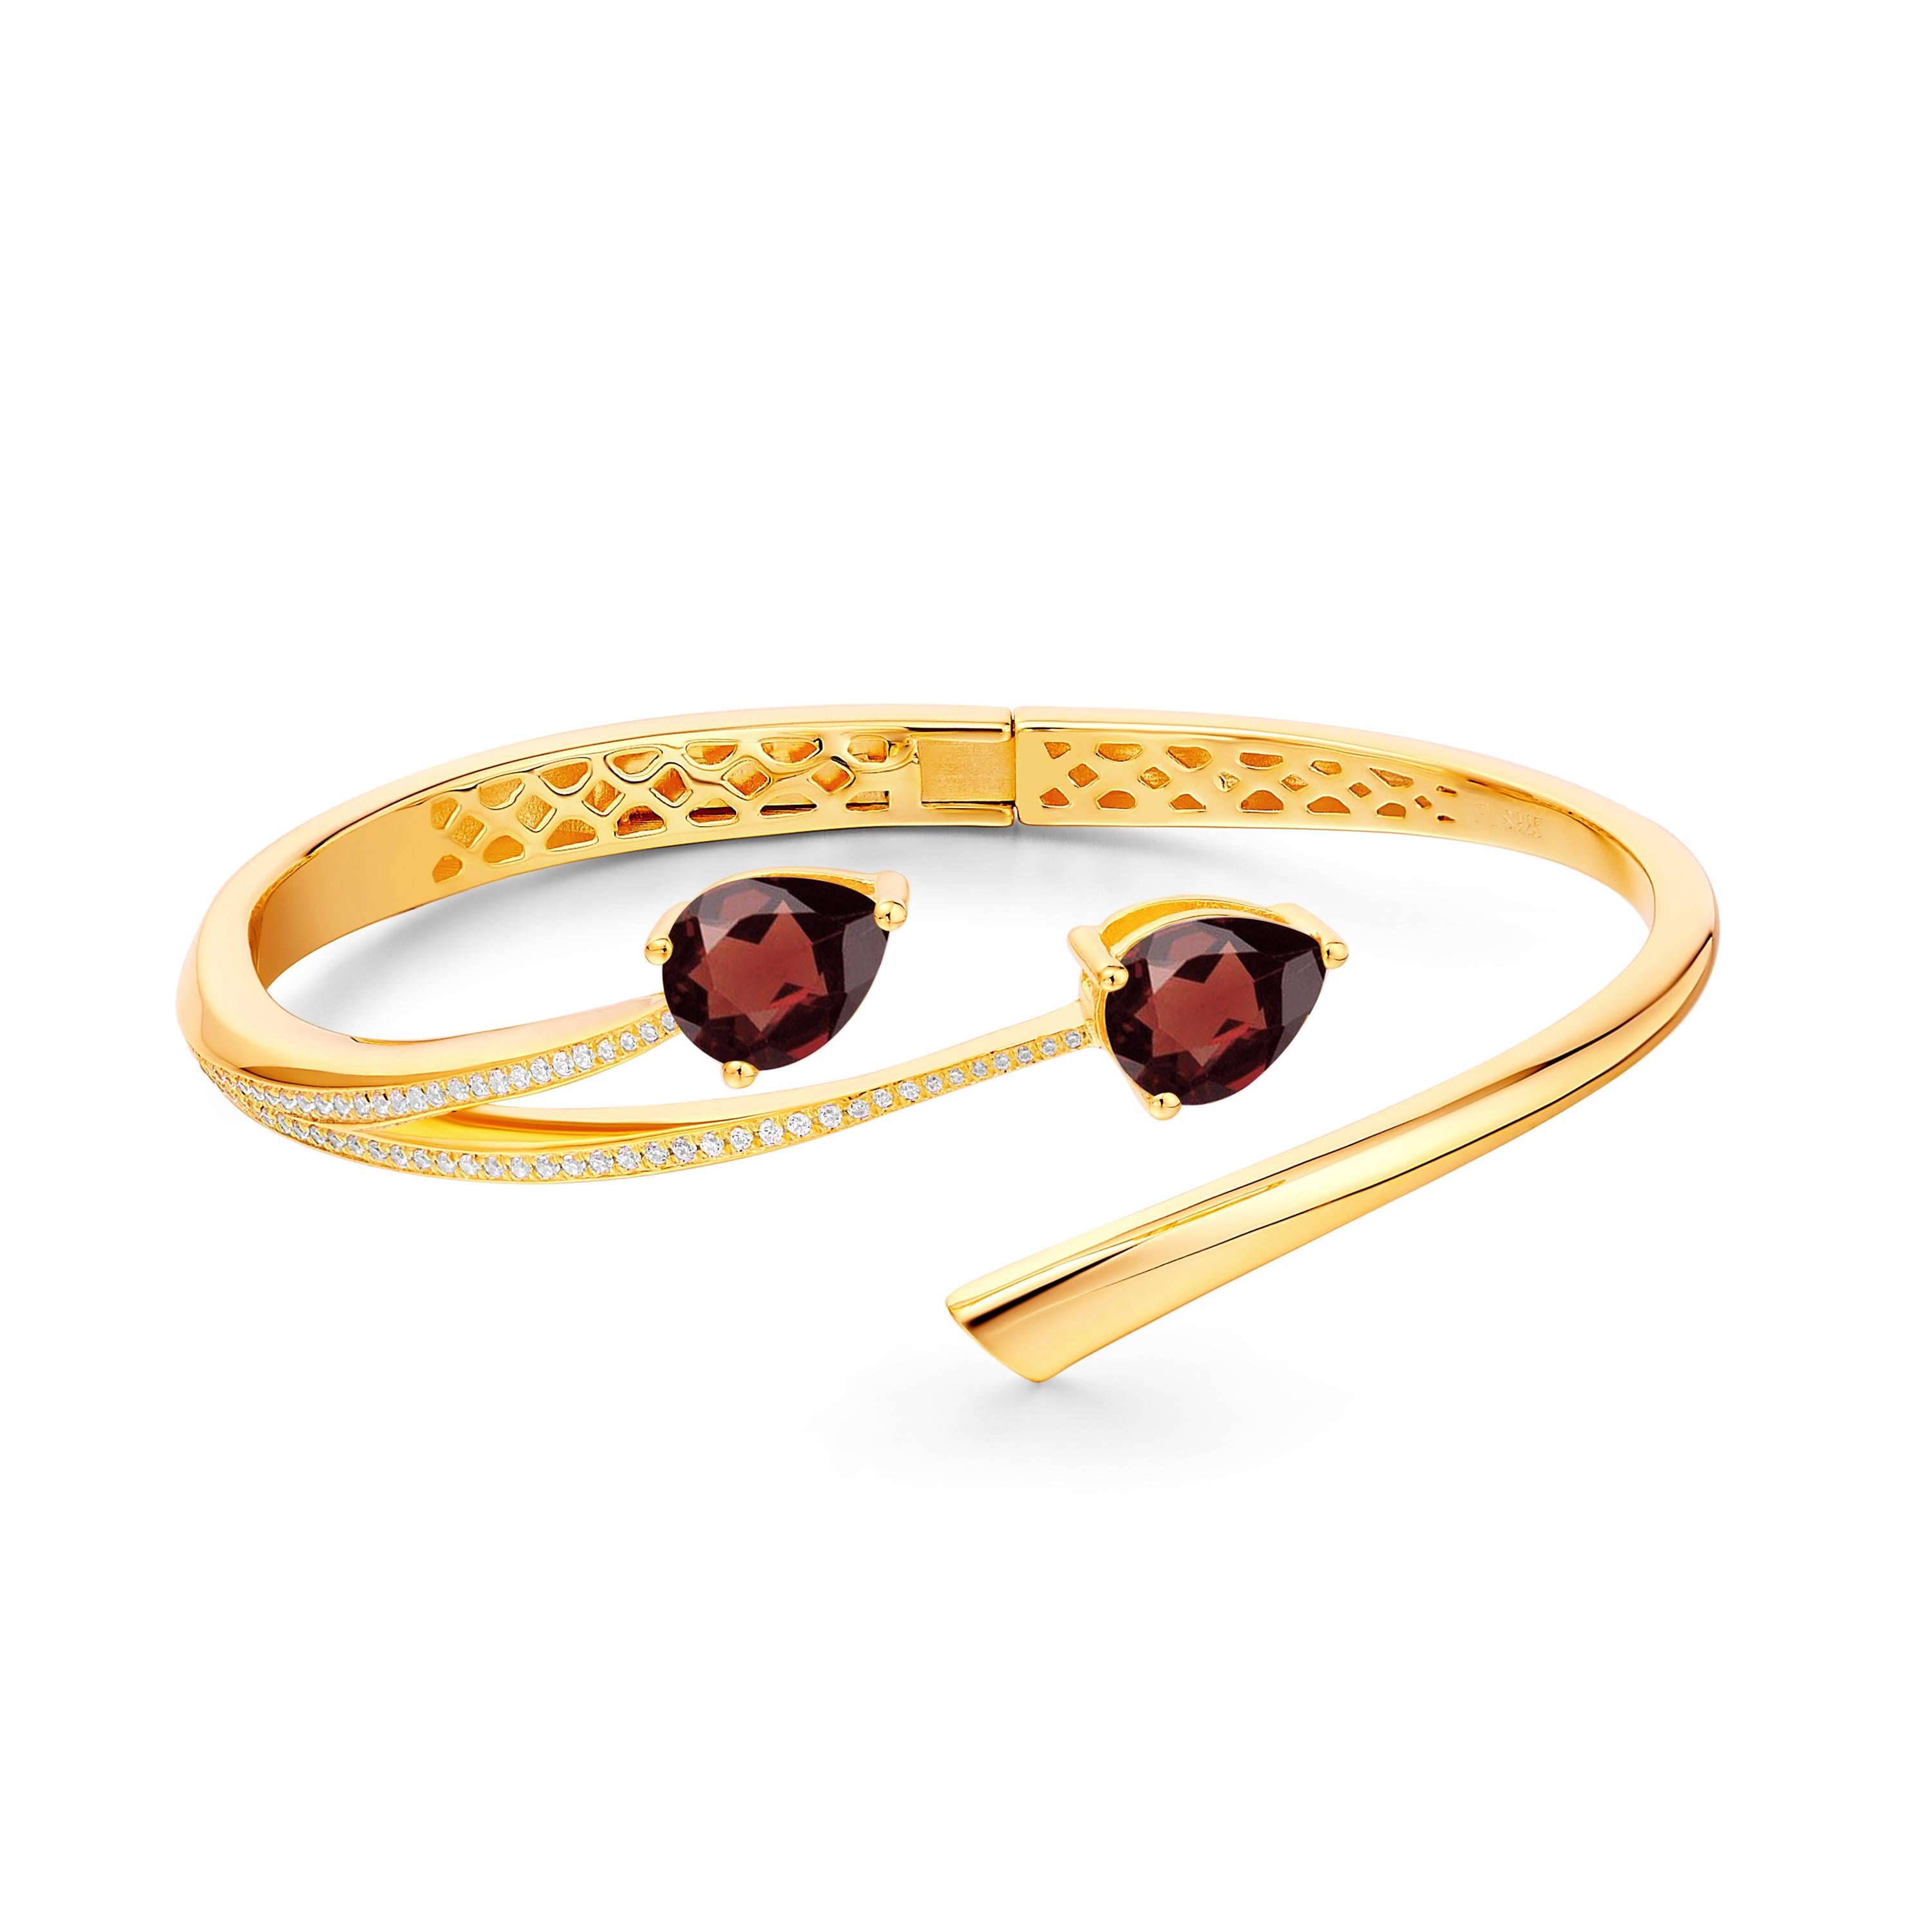 Description:
Shooting Star bangle with pear cut garnets and Hearts and Arrows* white cubic zirconia, set in high polished 18ct yellow gold plated on sterling silver.

Inner diameter (LxW): small/medium = 56mm x 60 mm, large = 60mm x 65mm

*Hearts